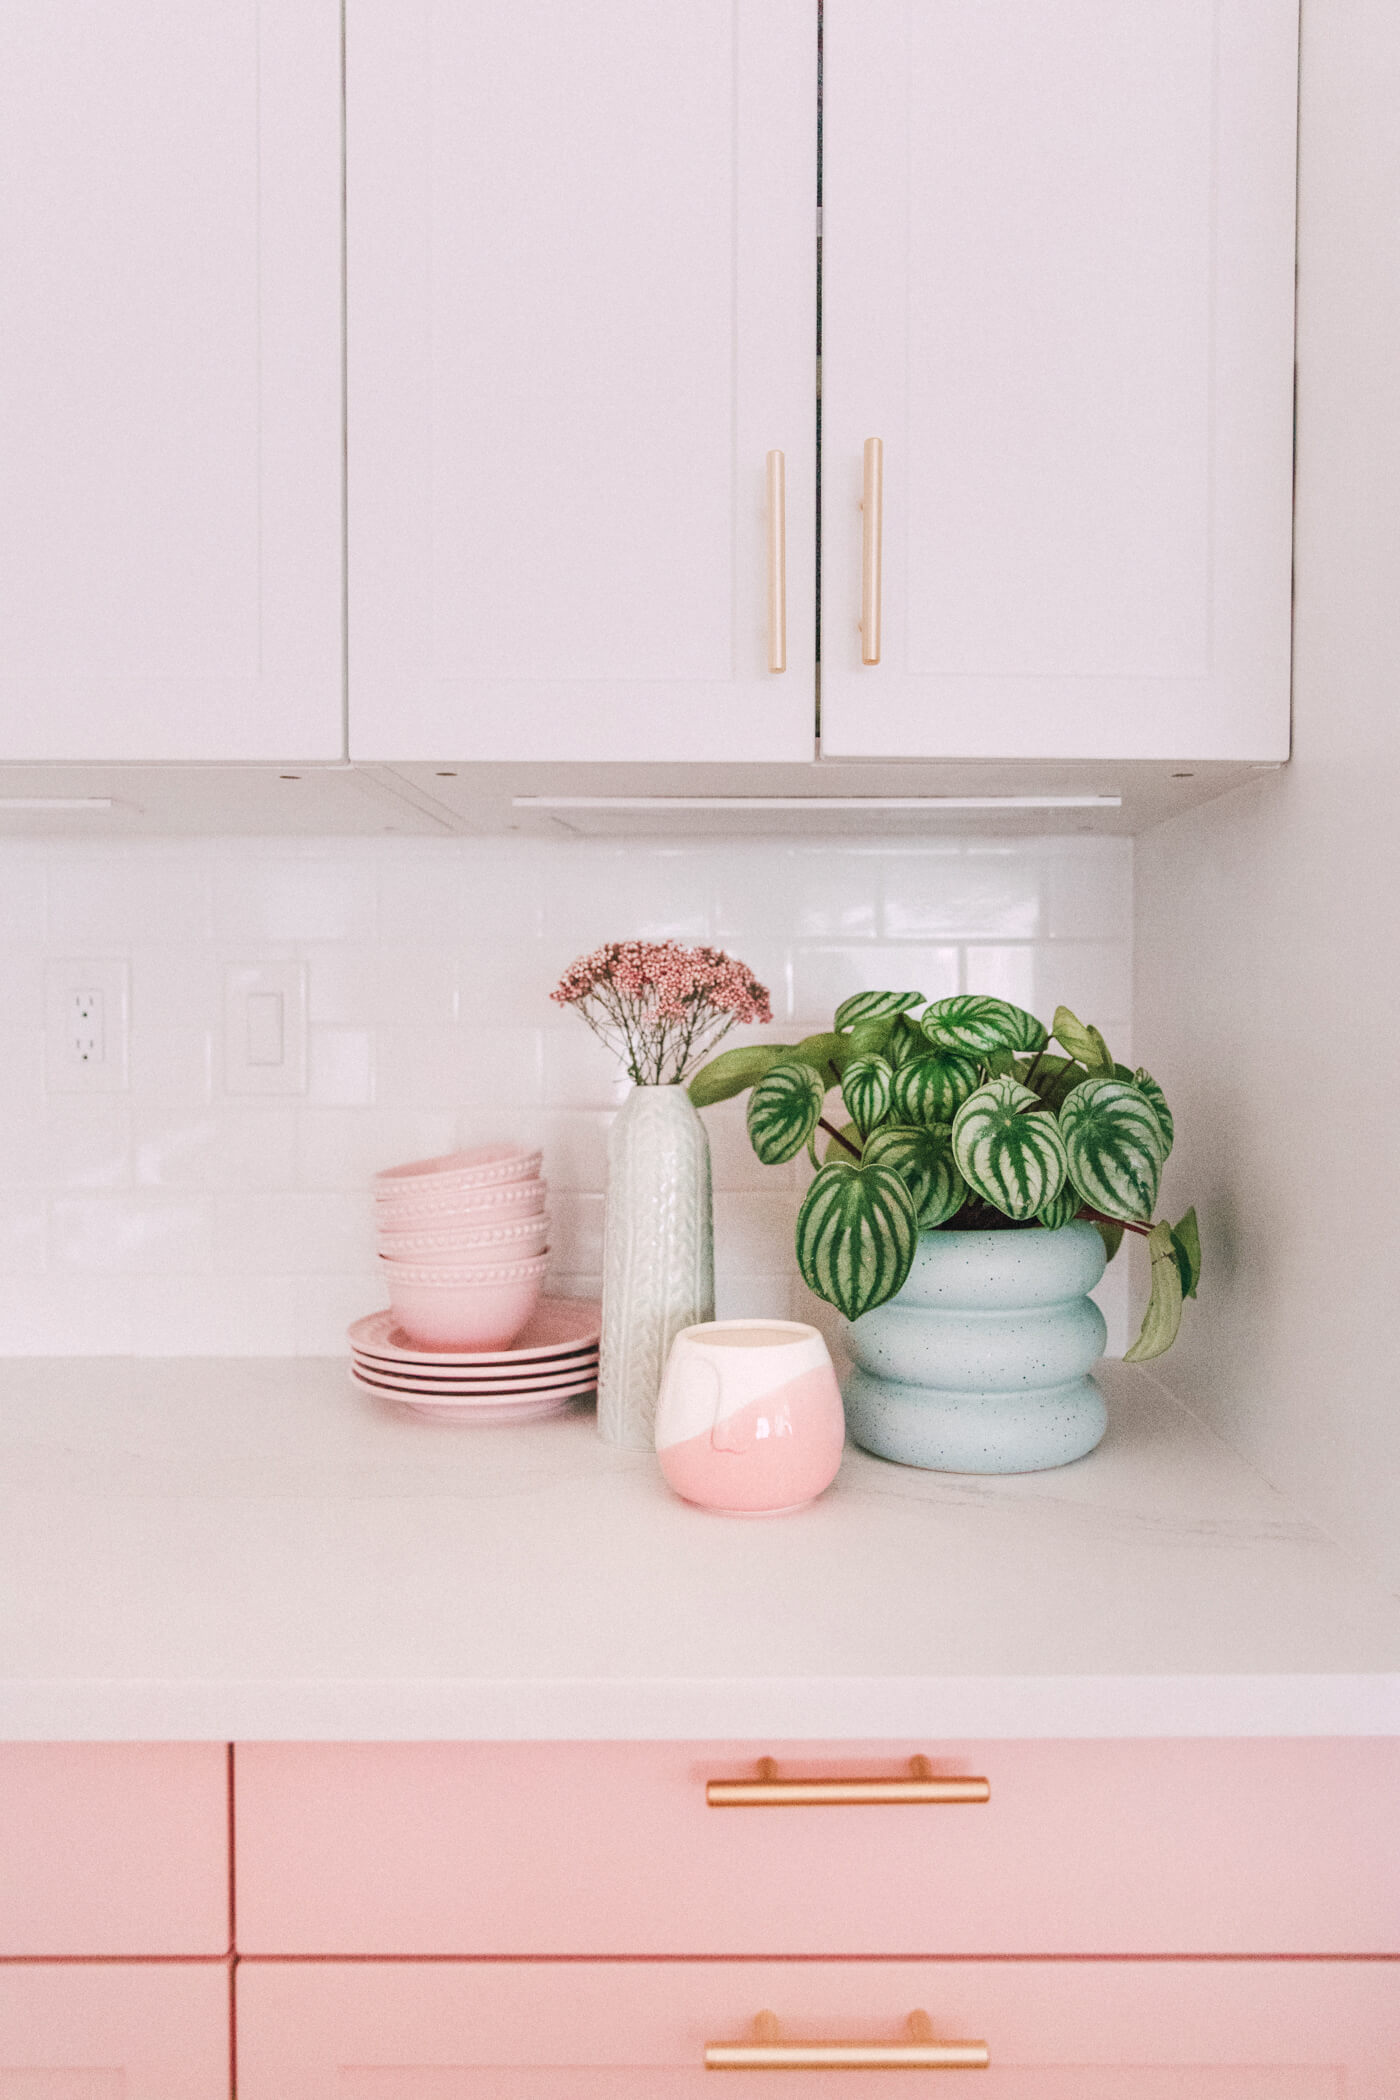 plant, plates and vases on countertop